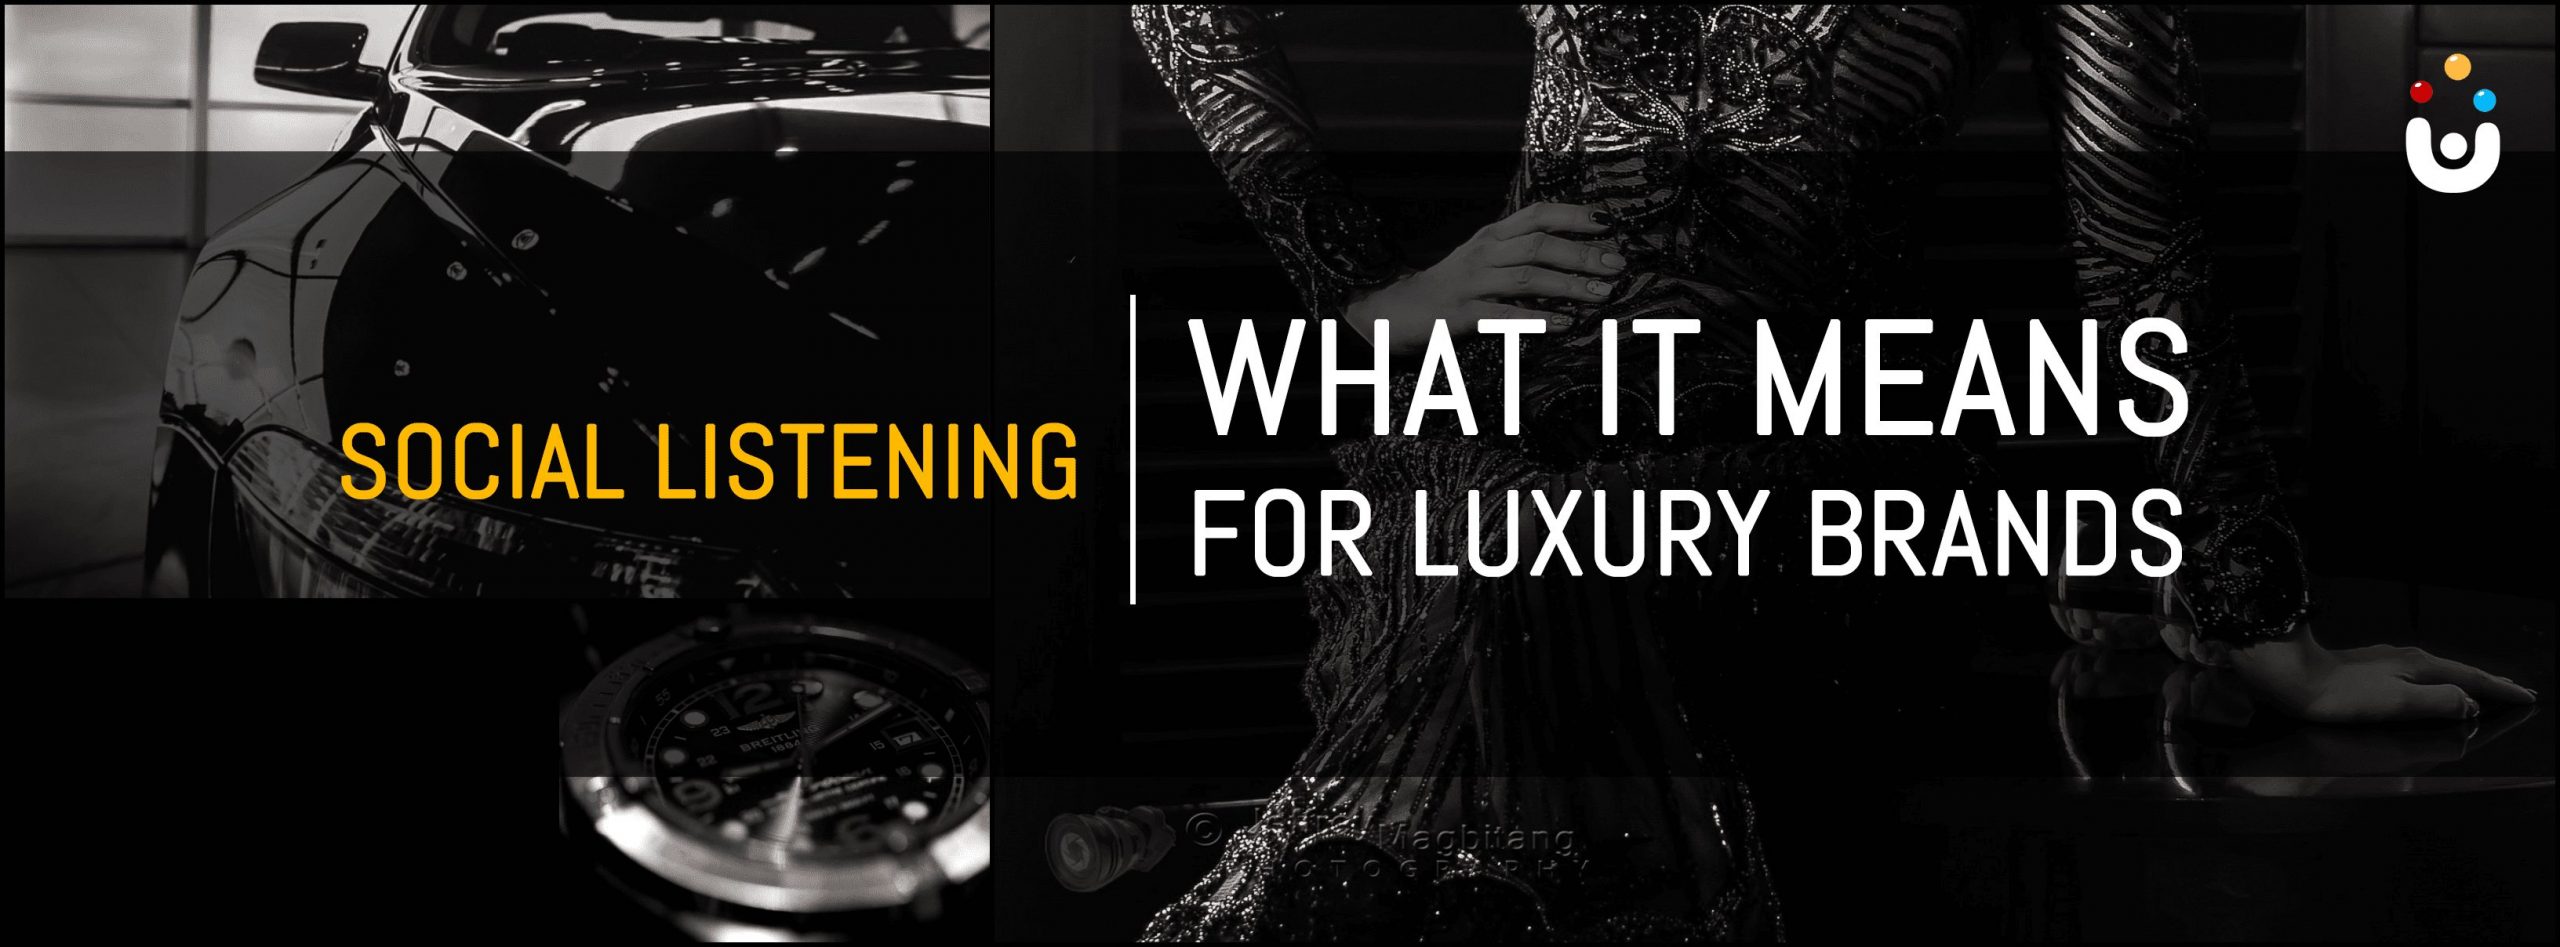 Why Social Listening for Luxury Brands?